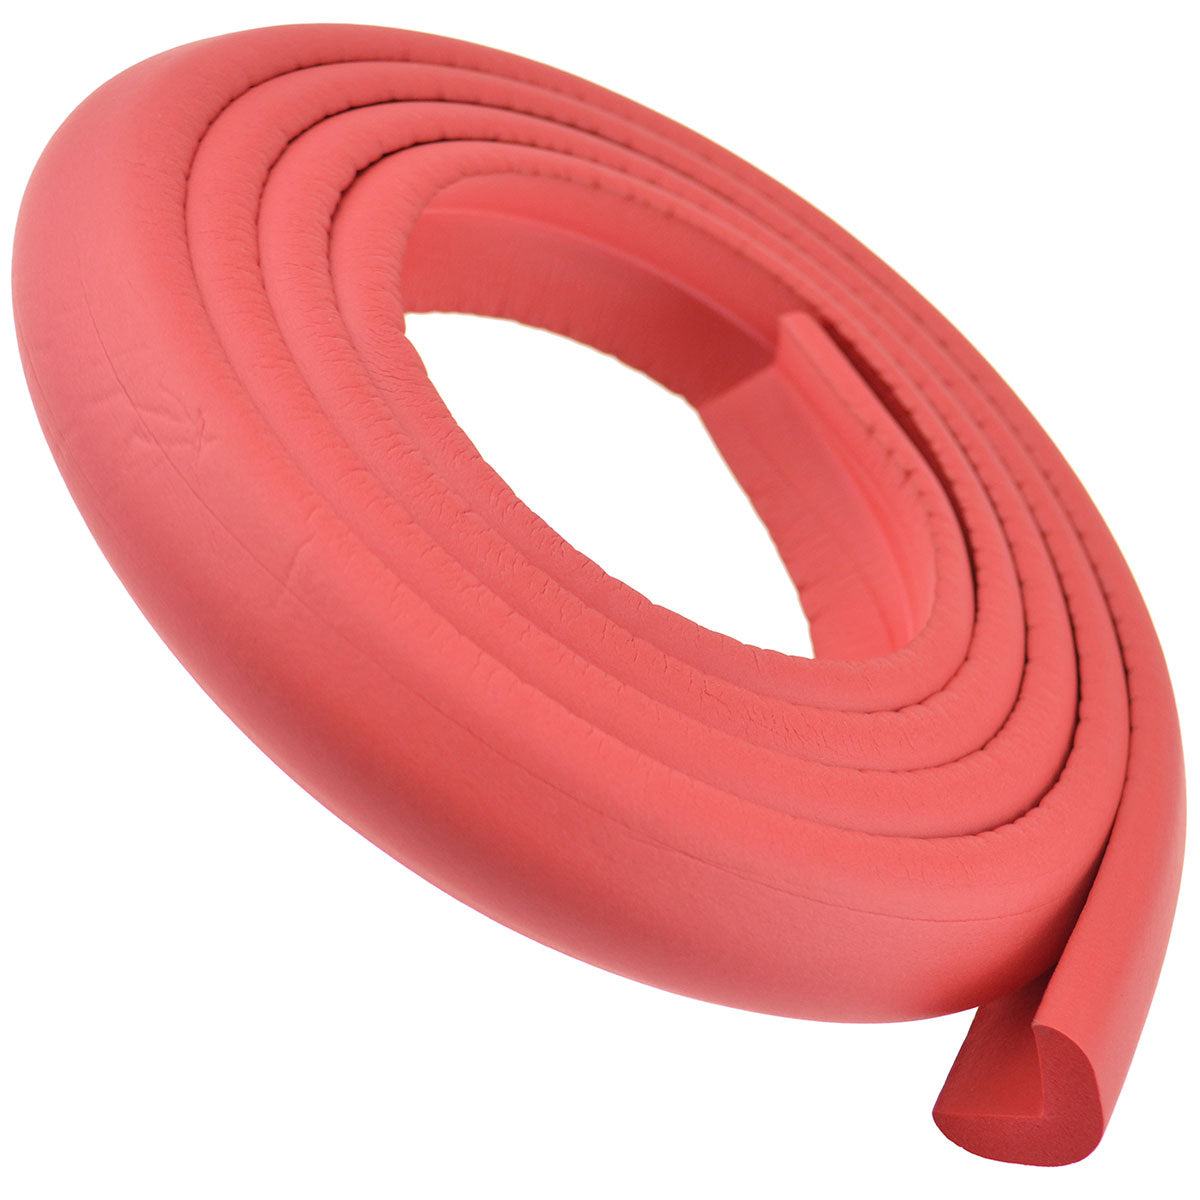 1 Roll Red Standard L-Shaped Foam Edge Protector 78.7 inches (2 meters)